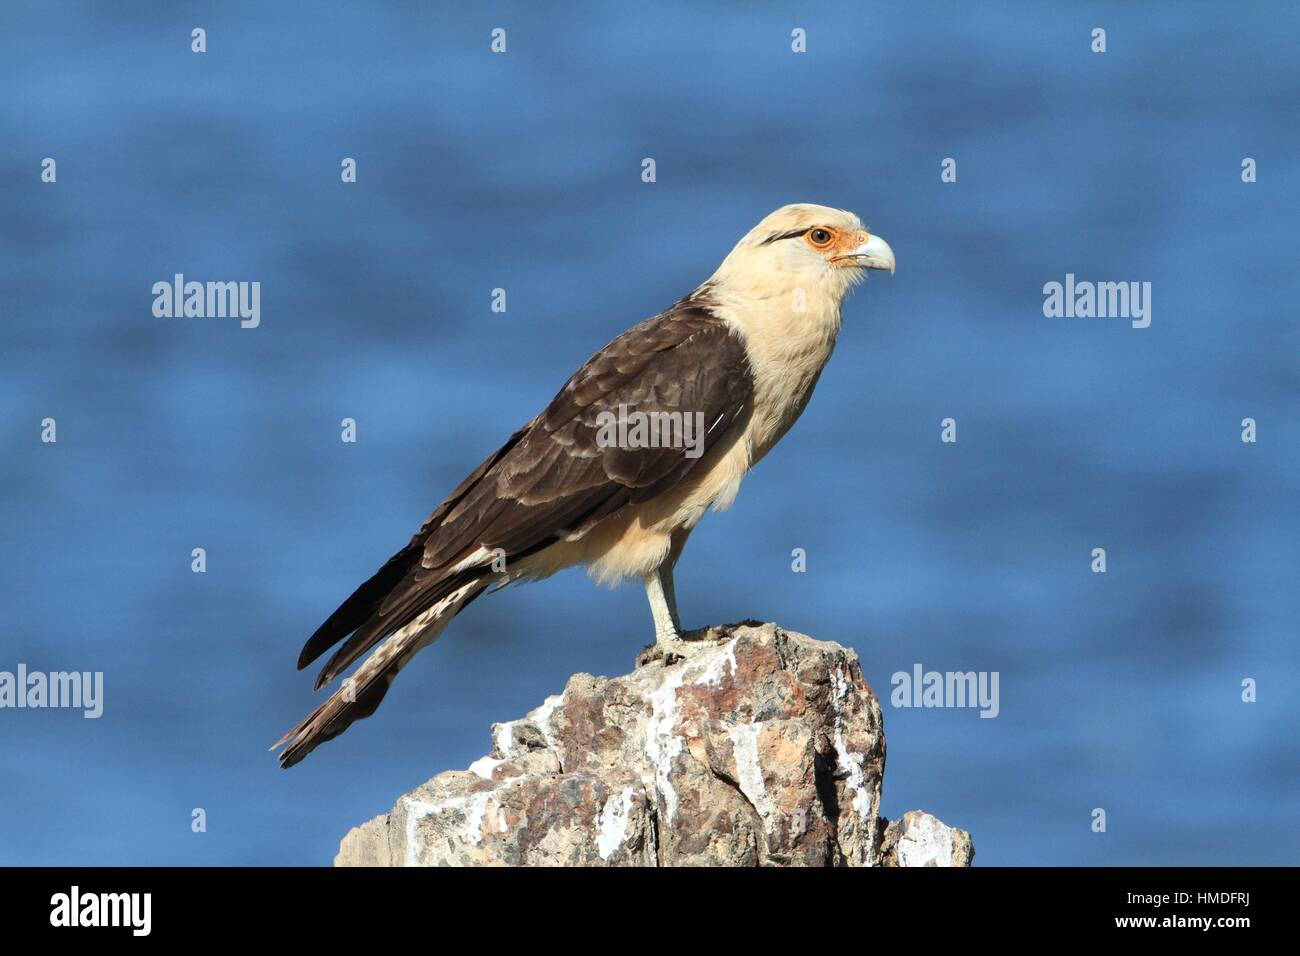 Page 2 - Caracara Costa Rica High Resolution Stock Photography and Images -  Alamy